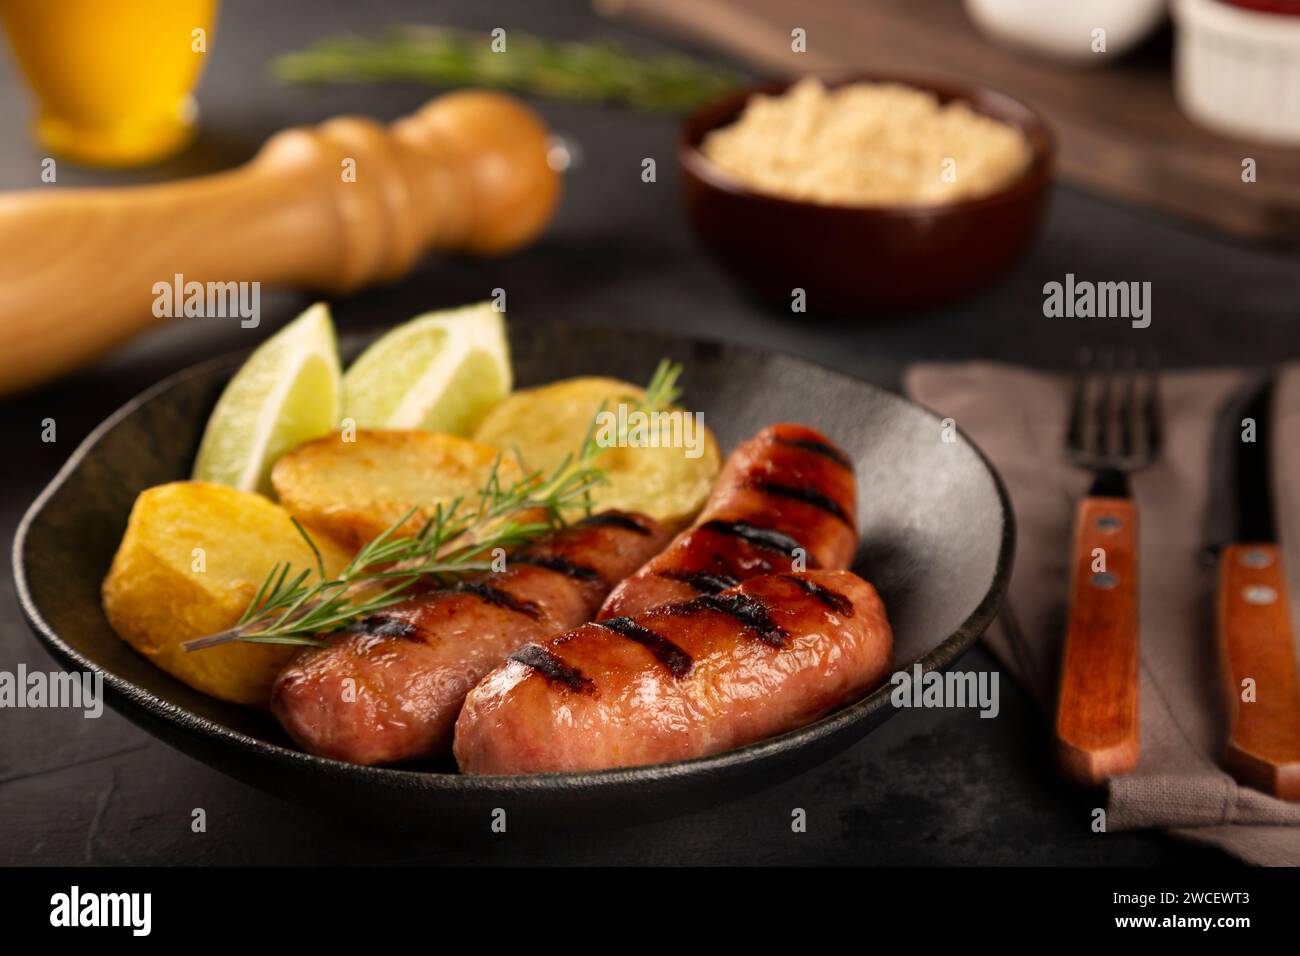 Grilled barbecue sausages on wooden background. Stock Photo